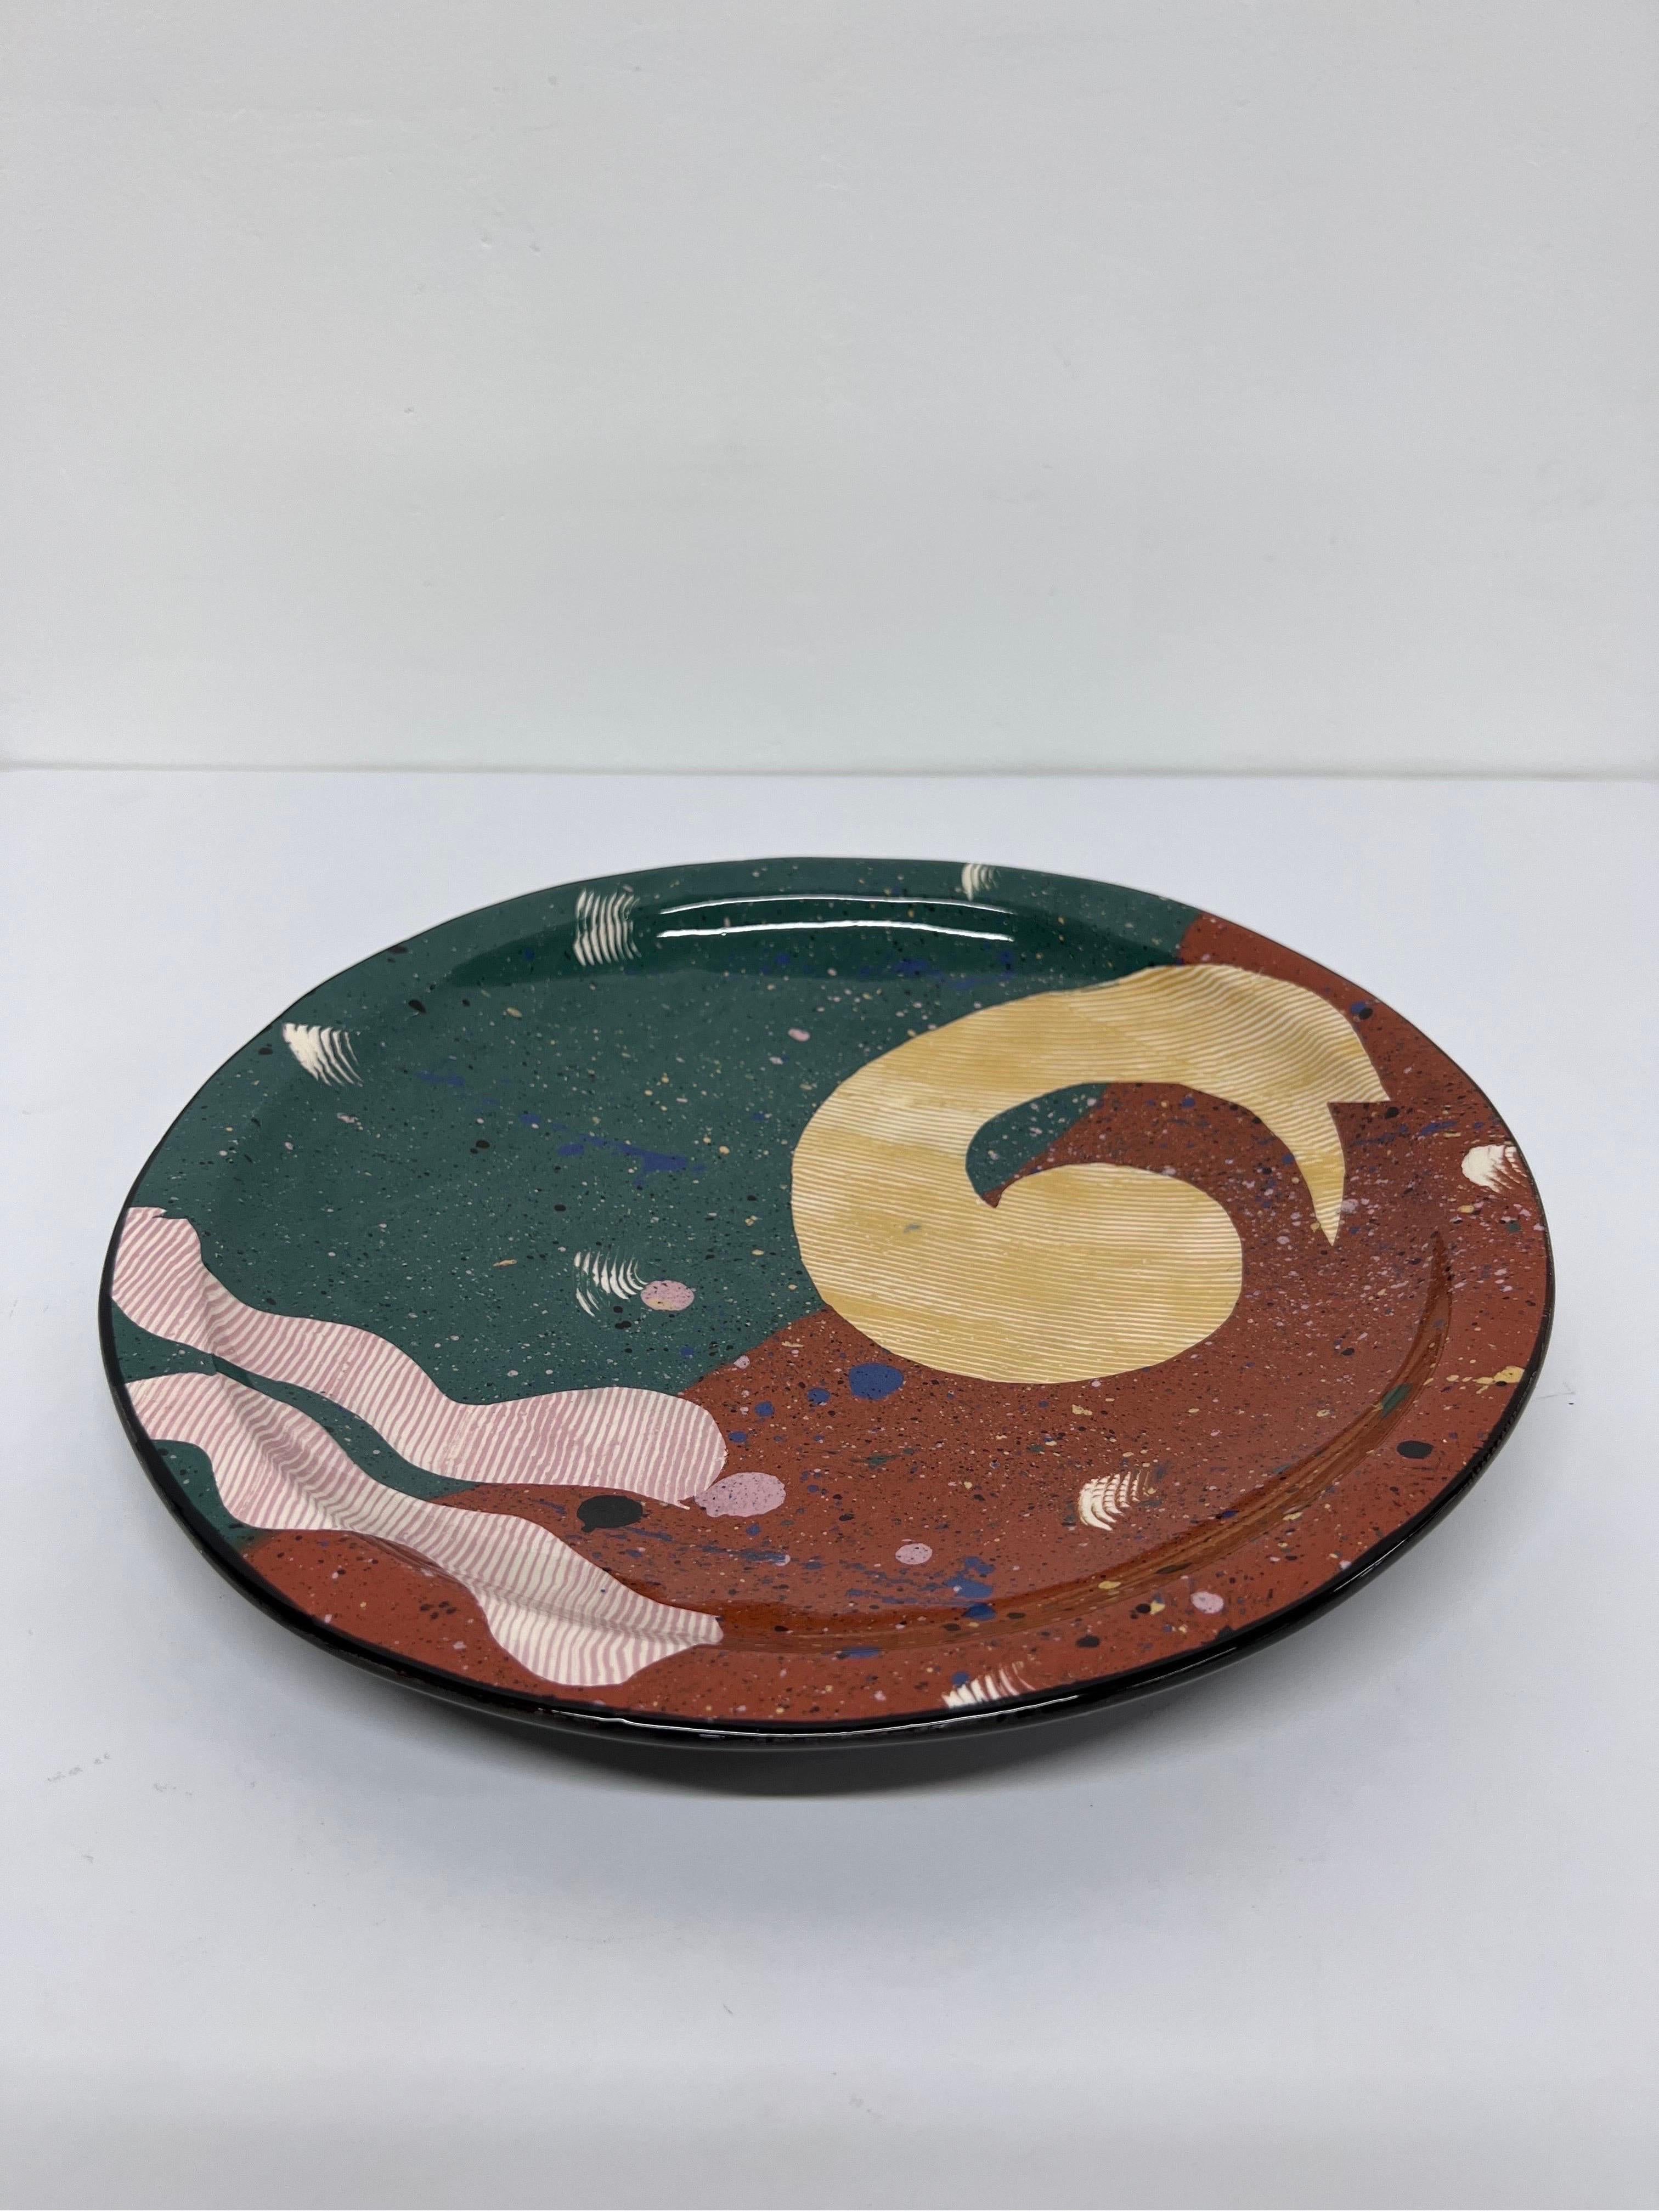 American Claudia Reese Cera-Mix Studio Pottery Postmodern Art Dinner Plate For Sale